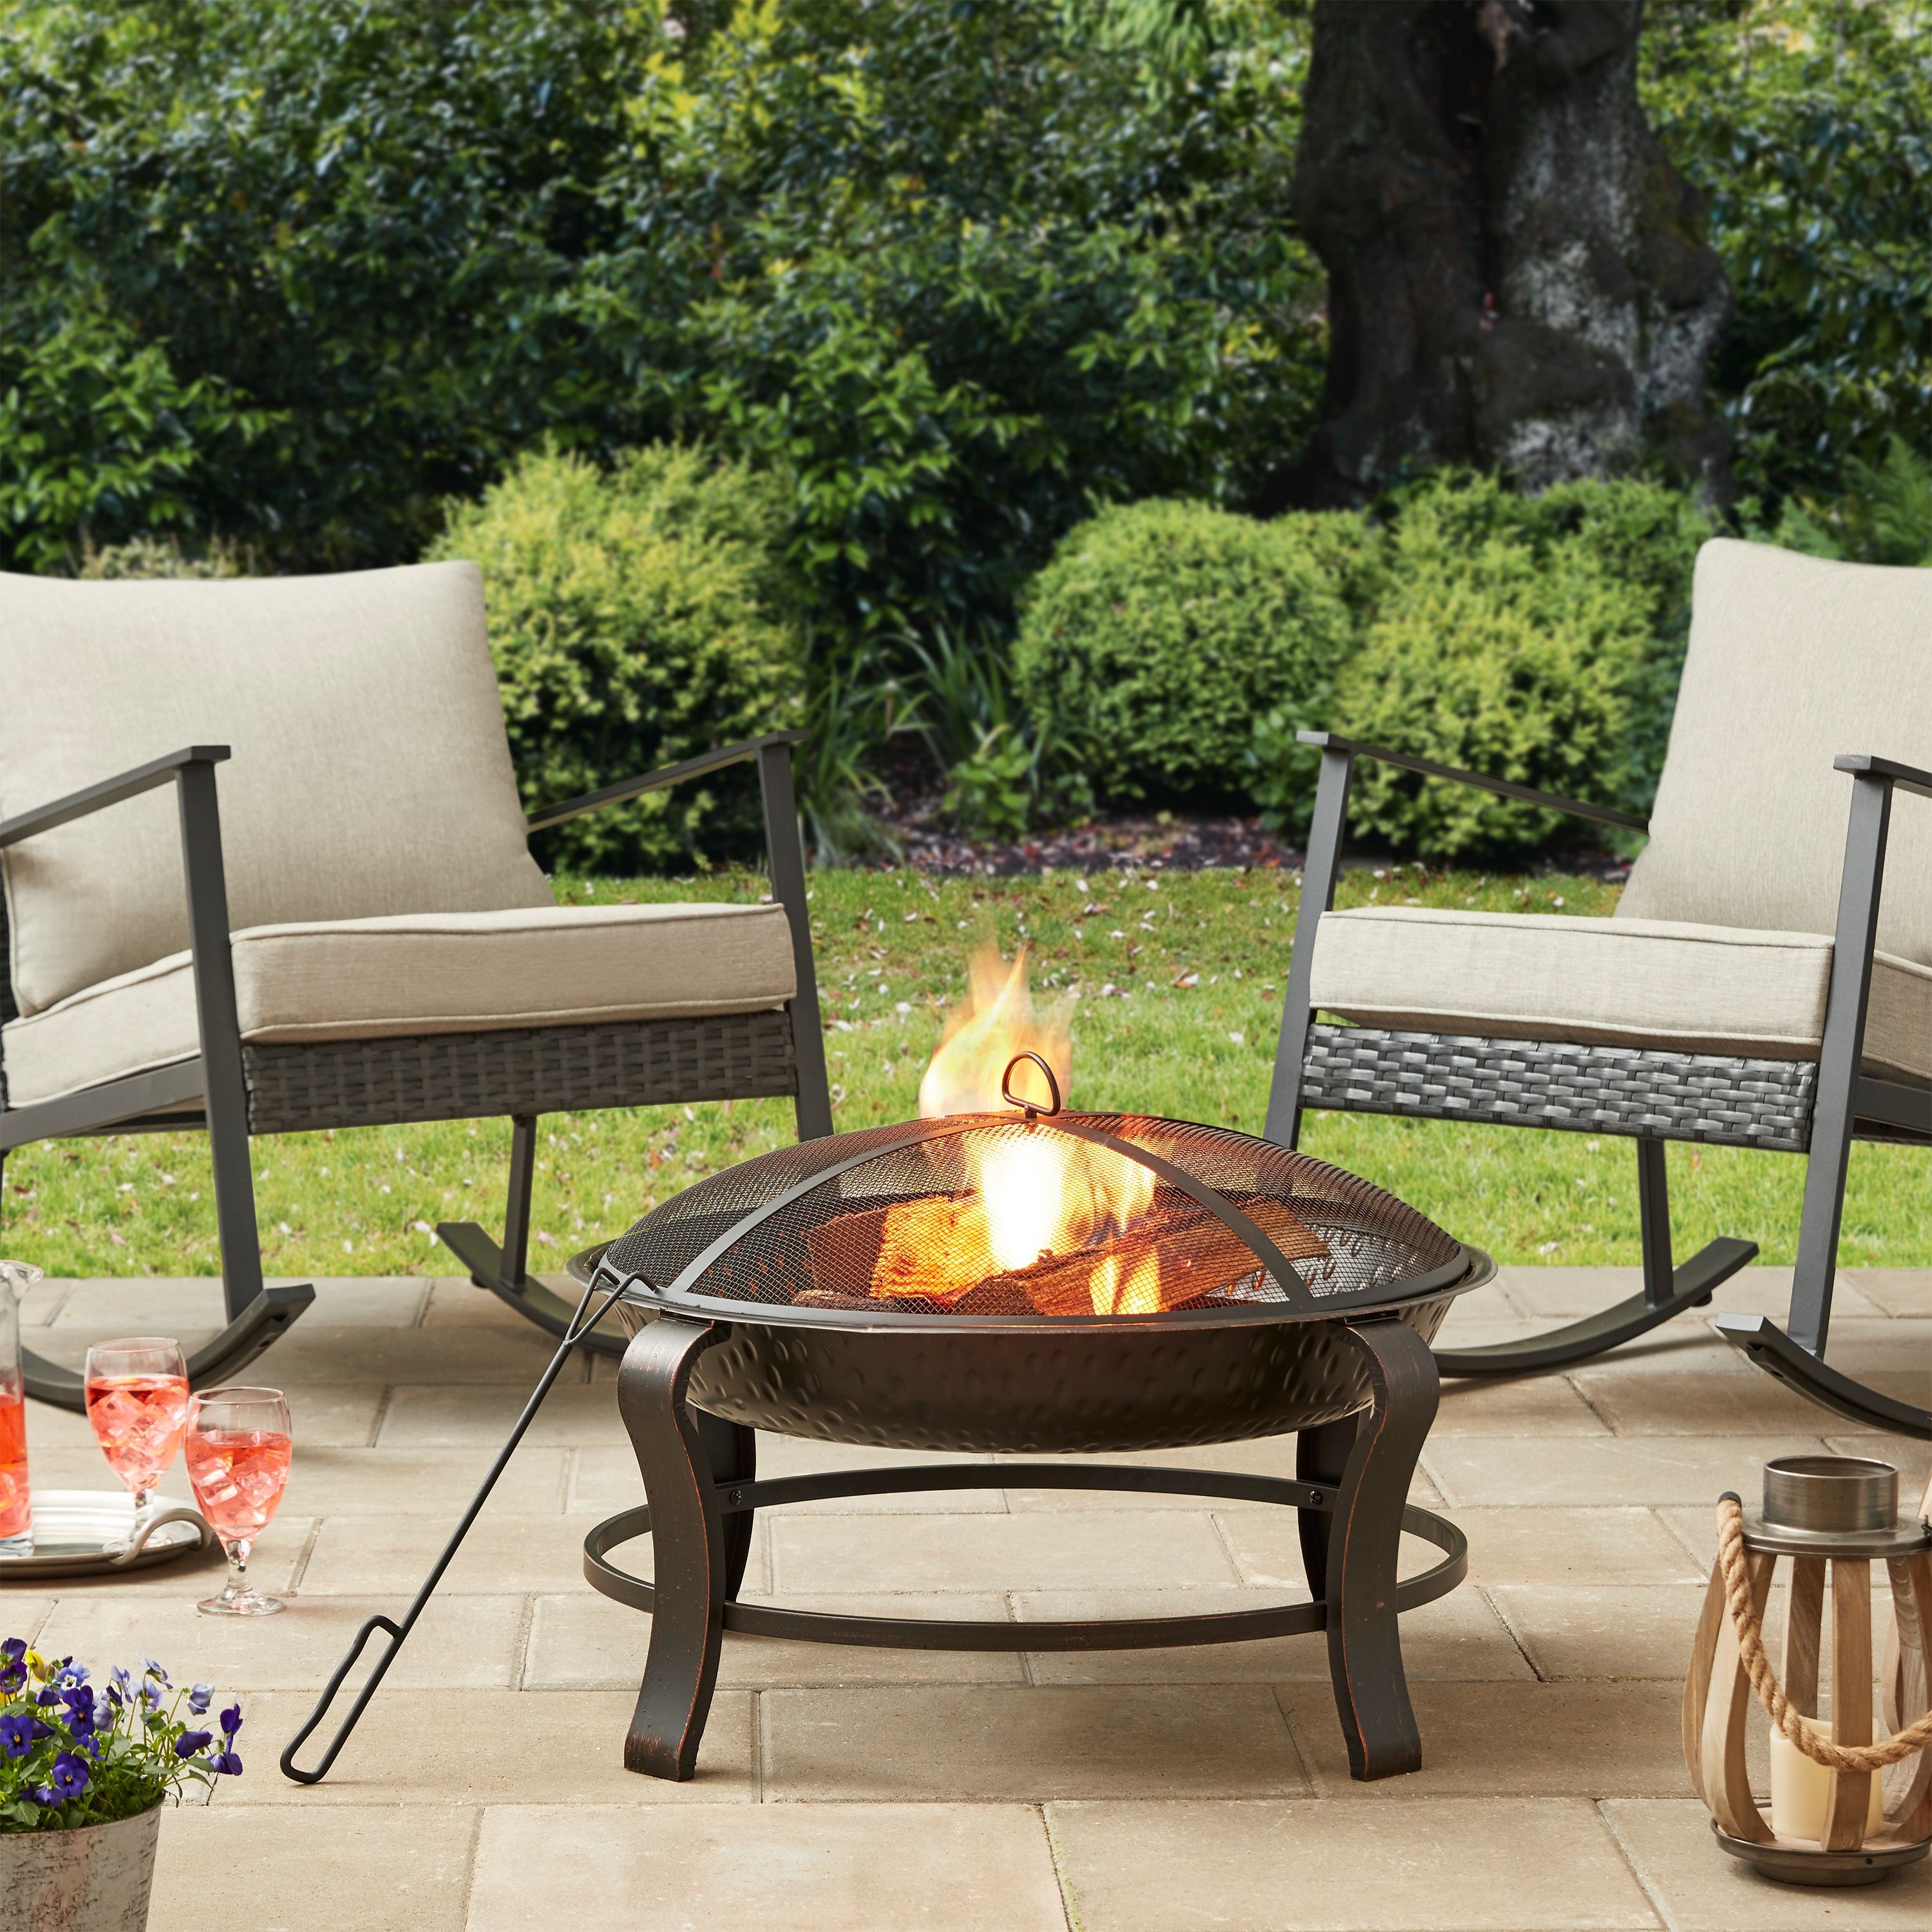 Best Wood Burning Fire Pits Where To, Cast Stone Wood Fire Pit By Sun Joe